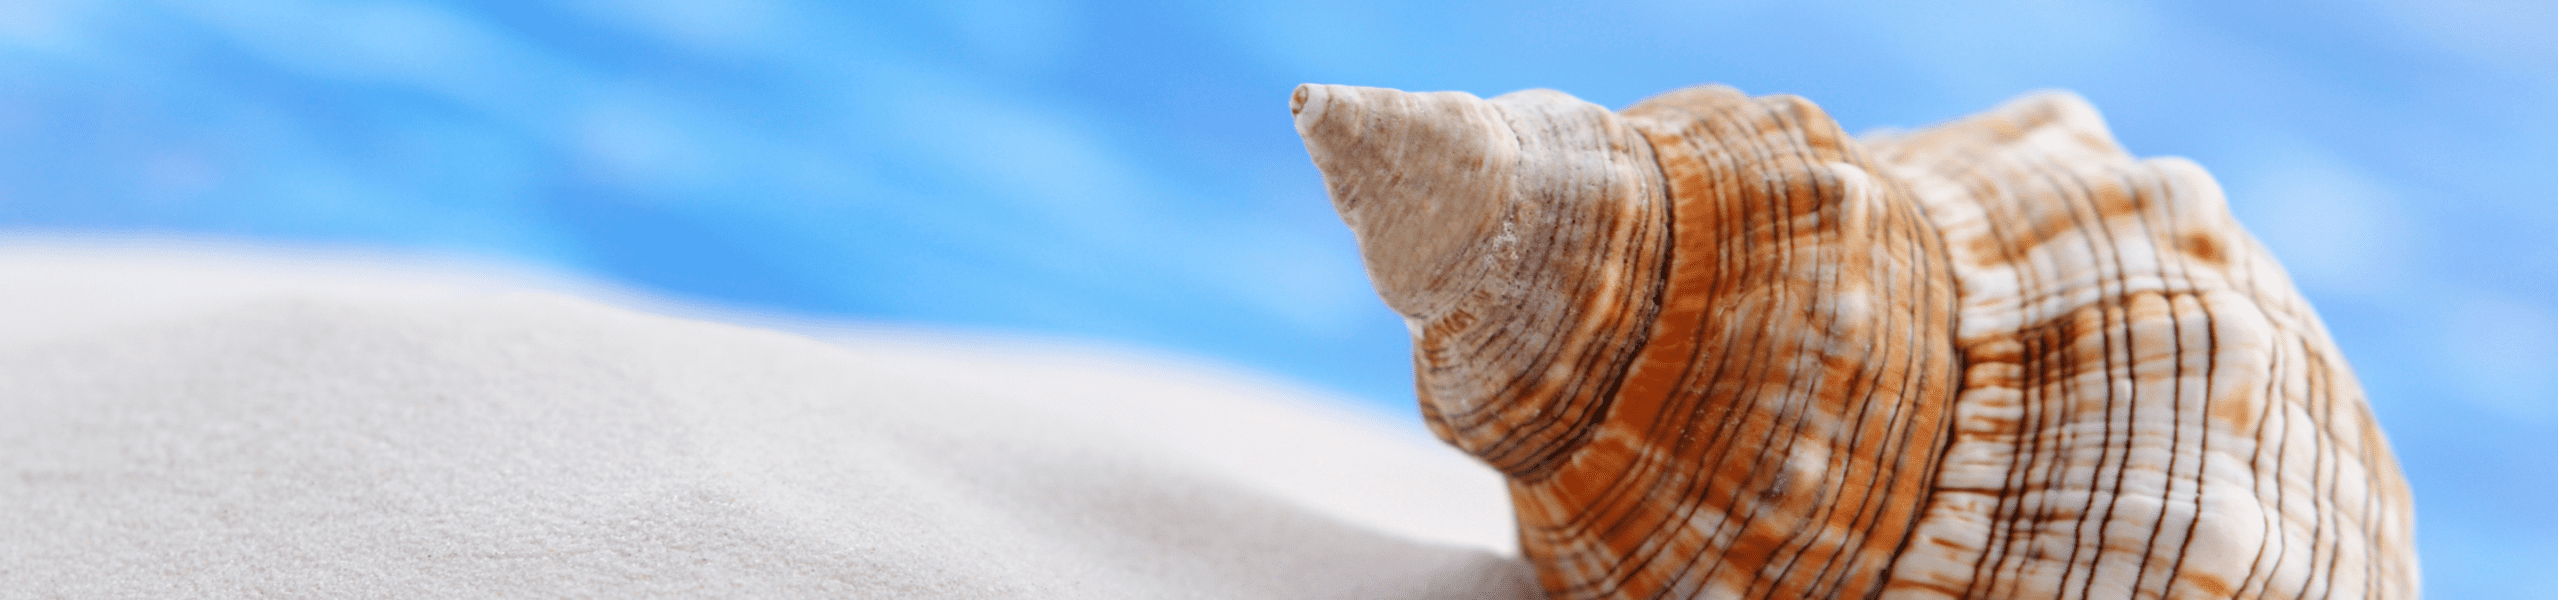 close up view of a spiral shell on the sand